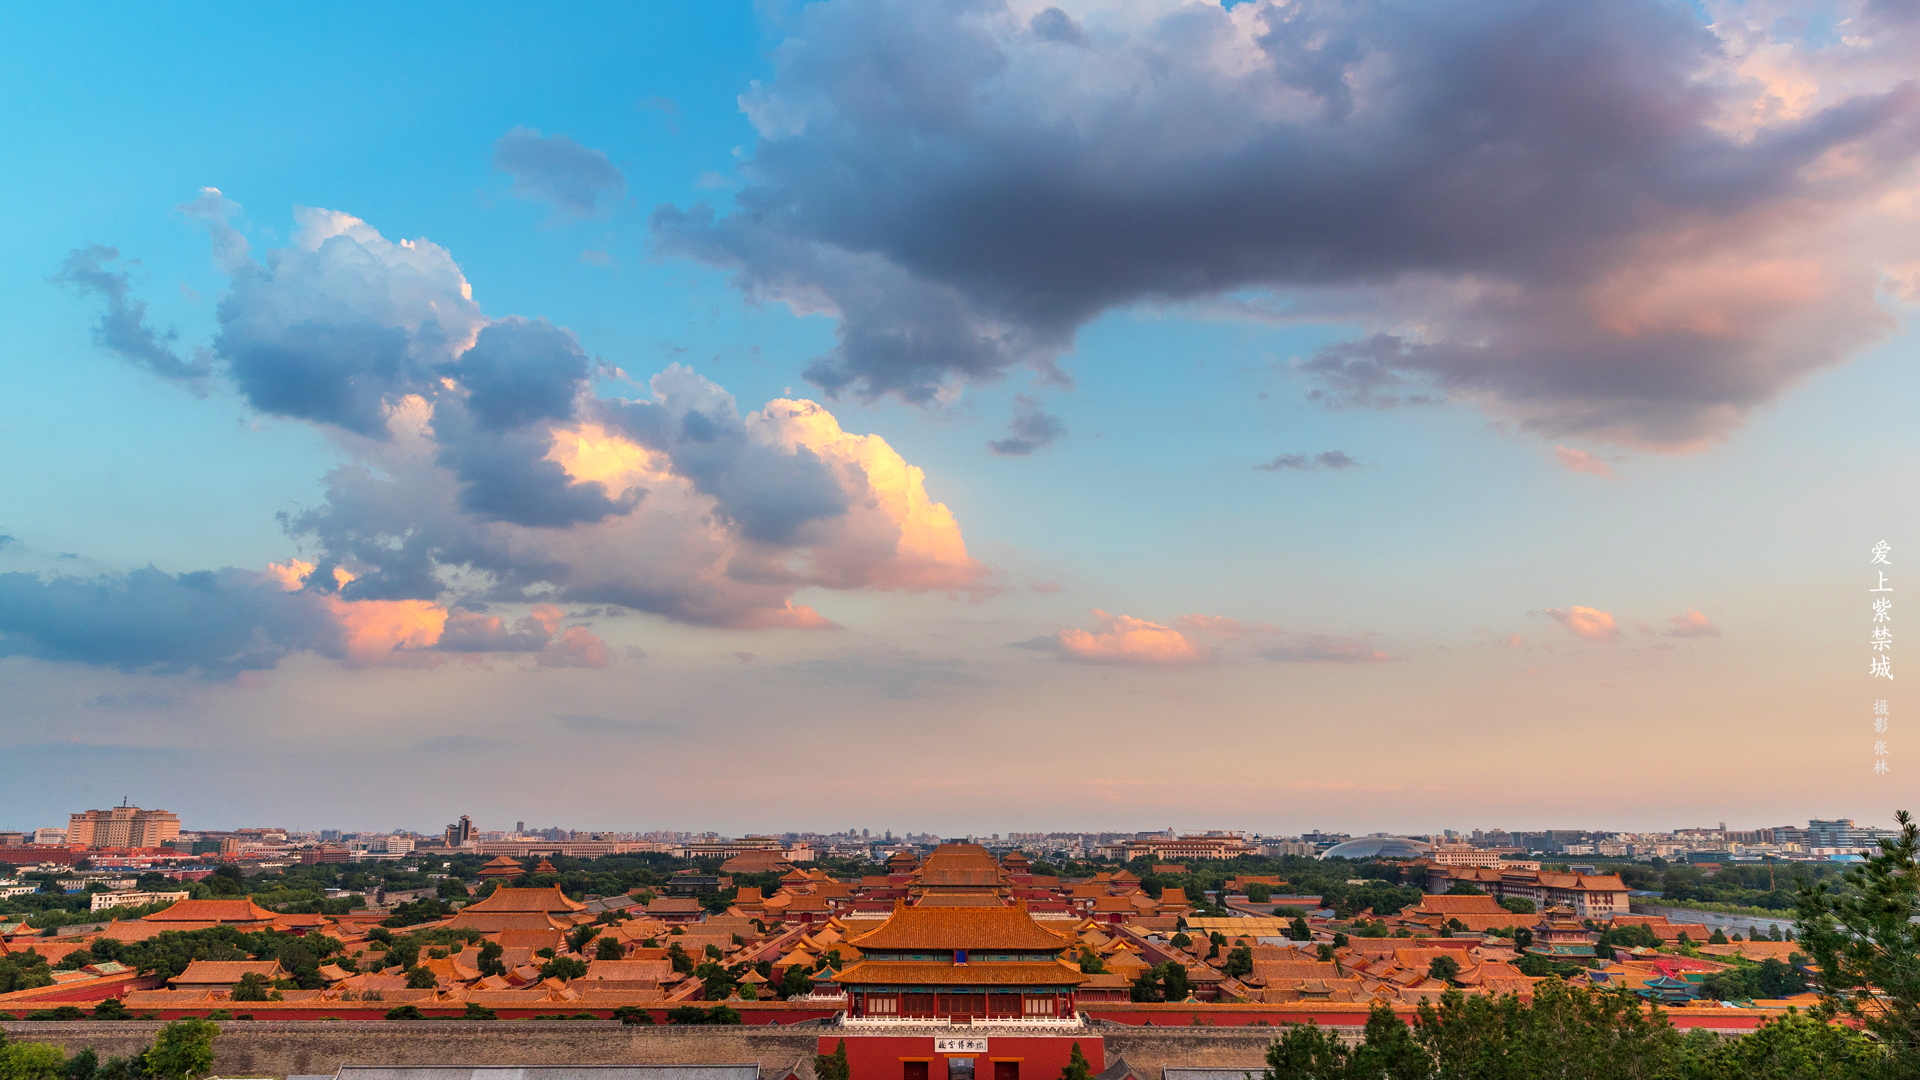 General 1920x1080 Forbidden City architecture palace clouds sky watermarked